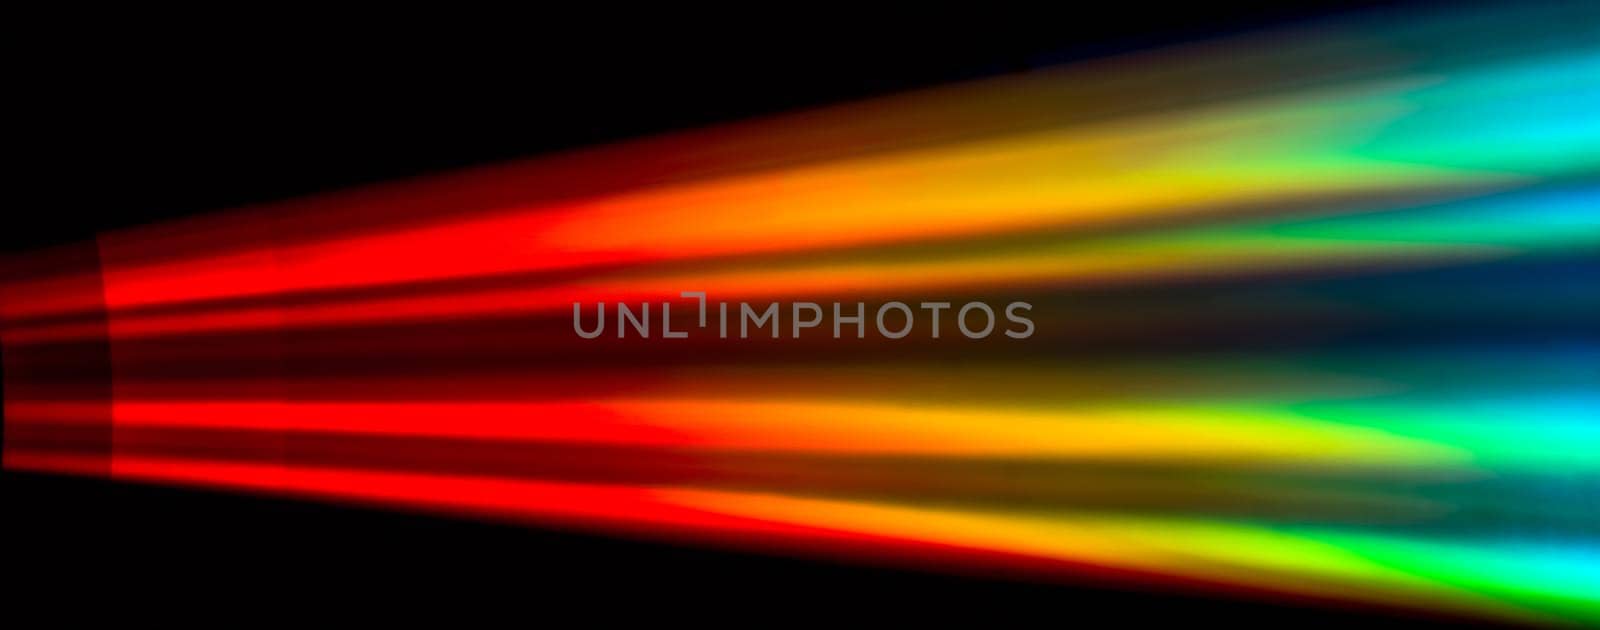 Colourfull burst of prismatic light creating rainbow on compact disk,  soft focus